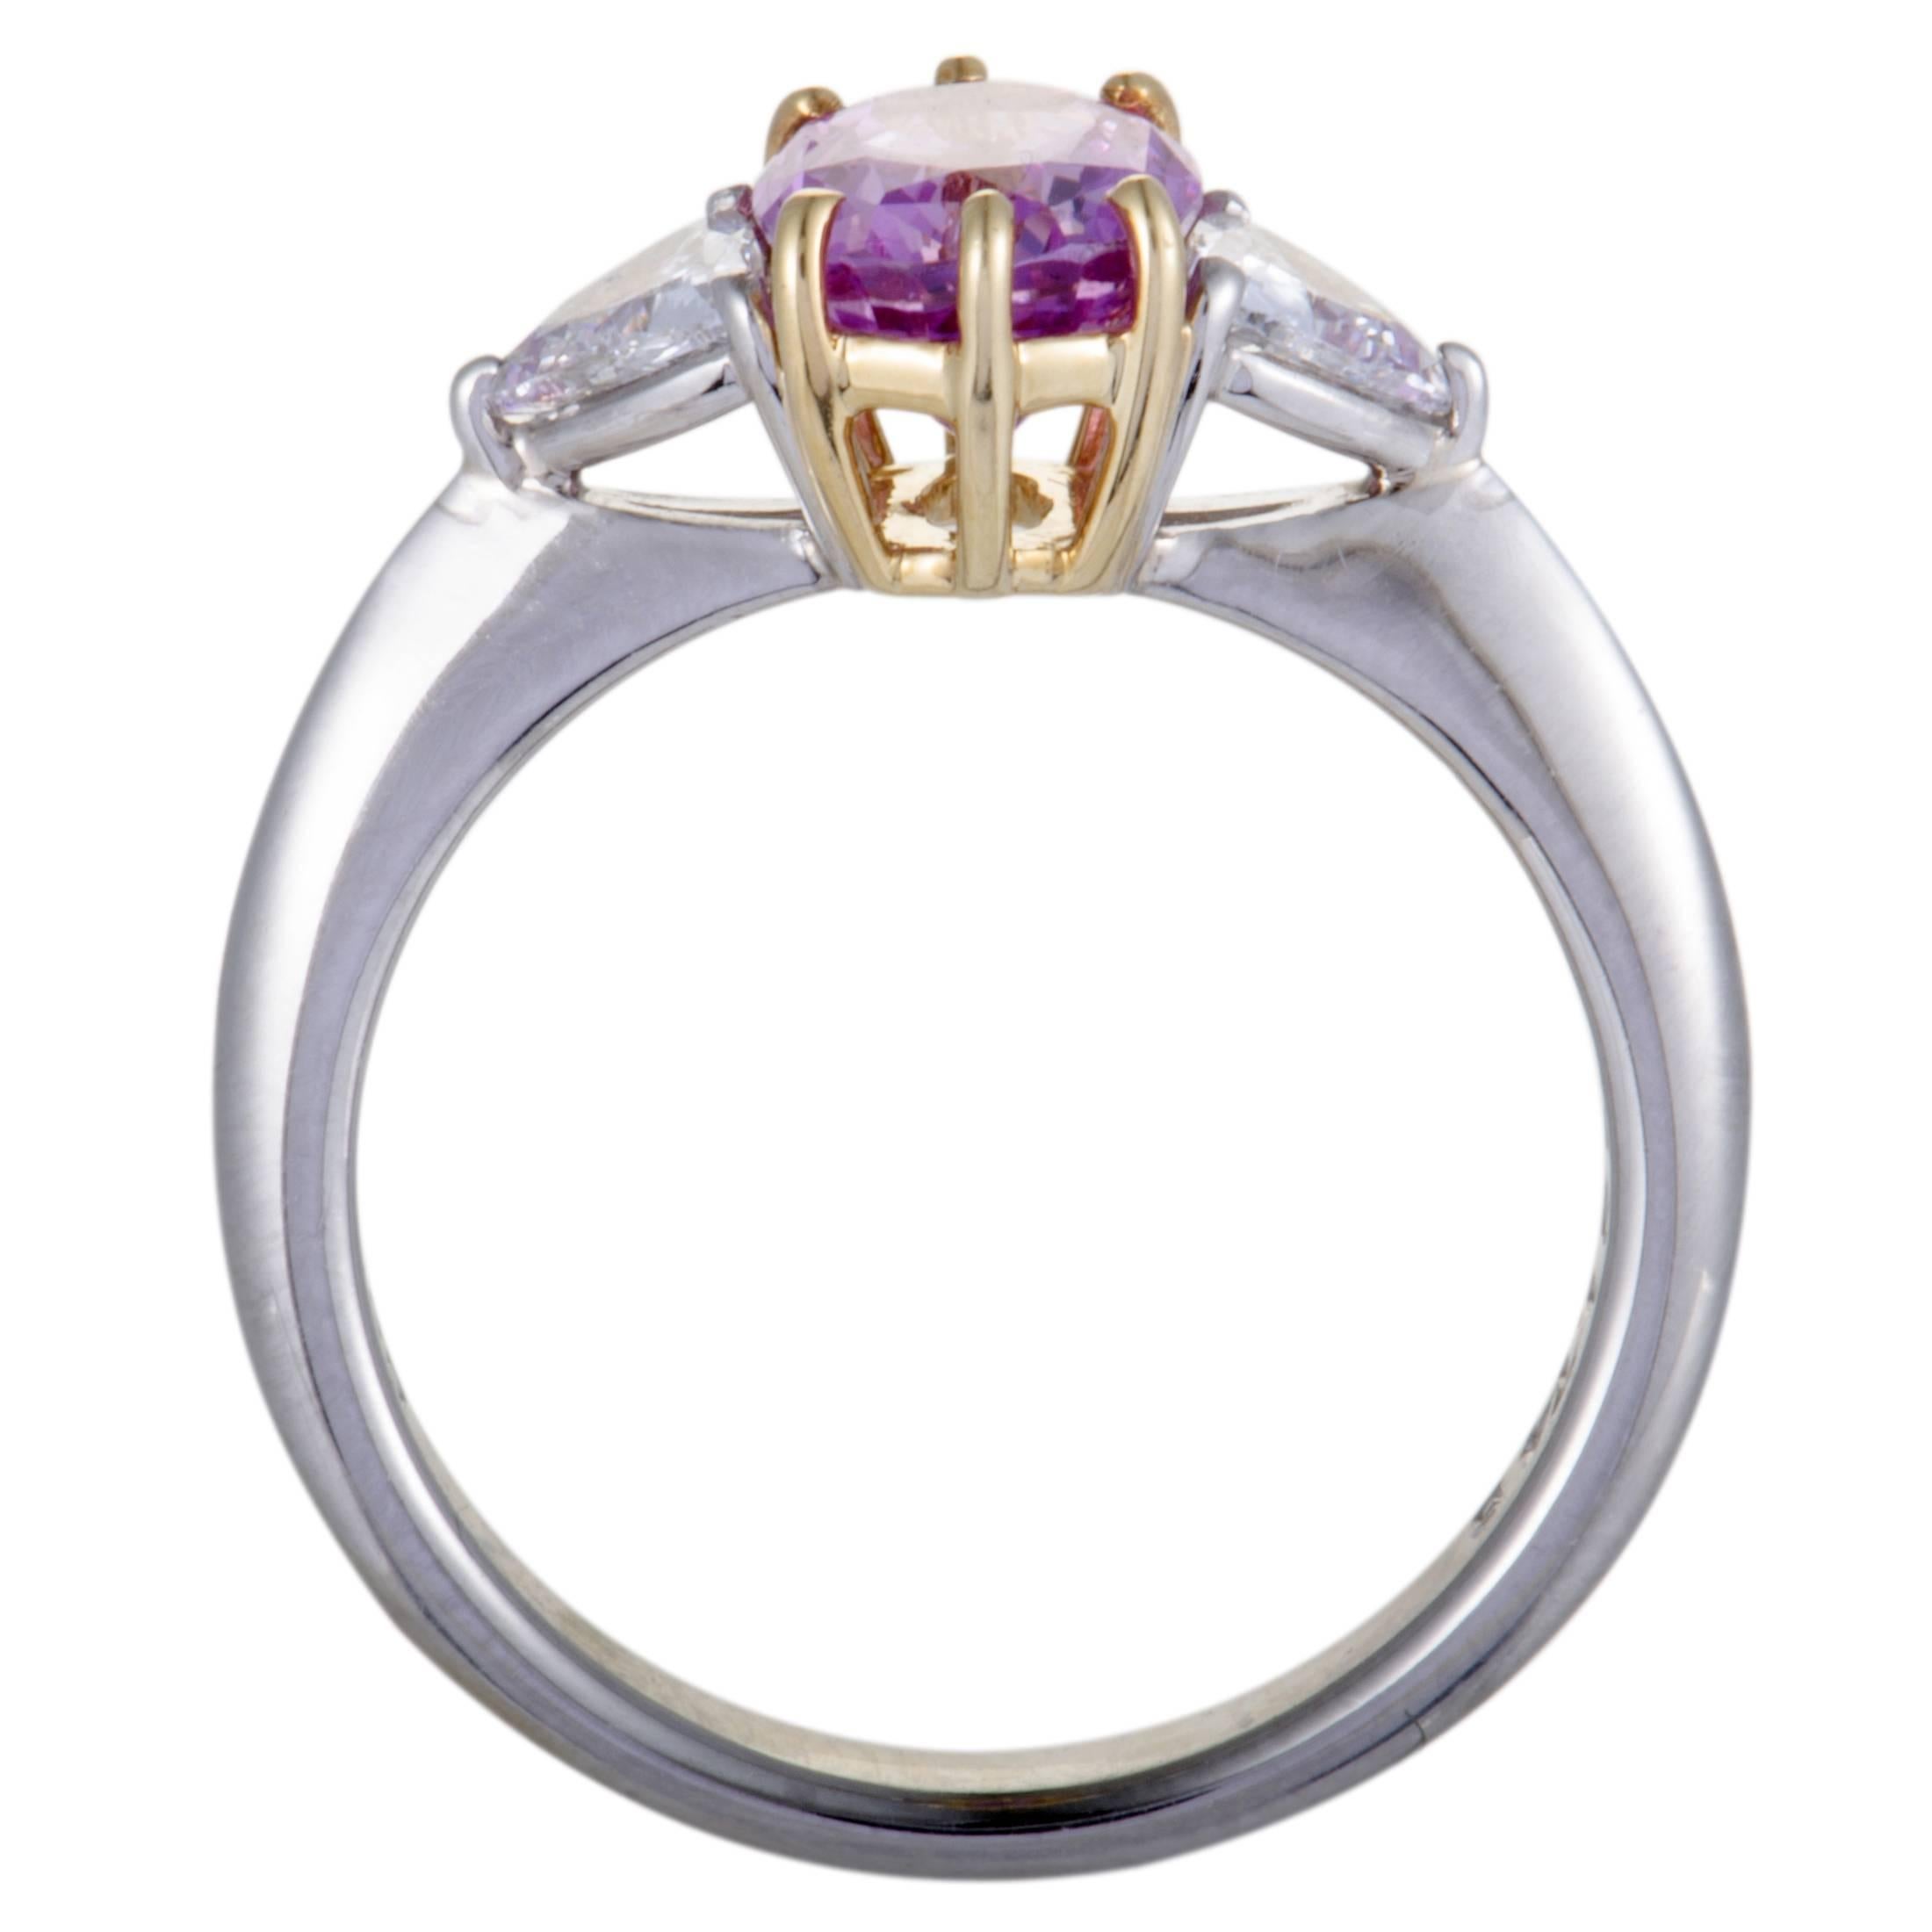 This sensational ring is beautifully designed in a gorgeous combination of 18K yellow gold and platinum. The ring displays an exquisitely charming appeal with its extravagant embellishment of .41ct of diamonds and a spectacular 1.74ct pink sapphire